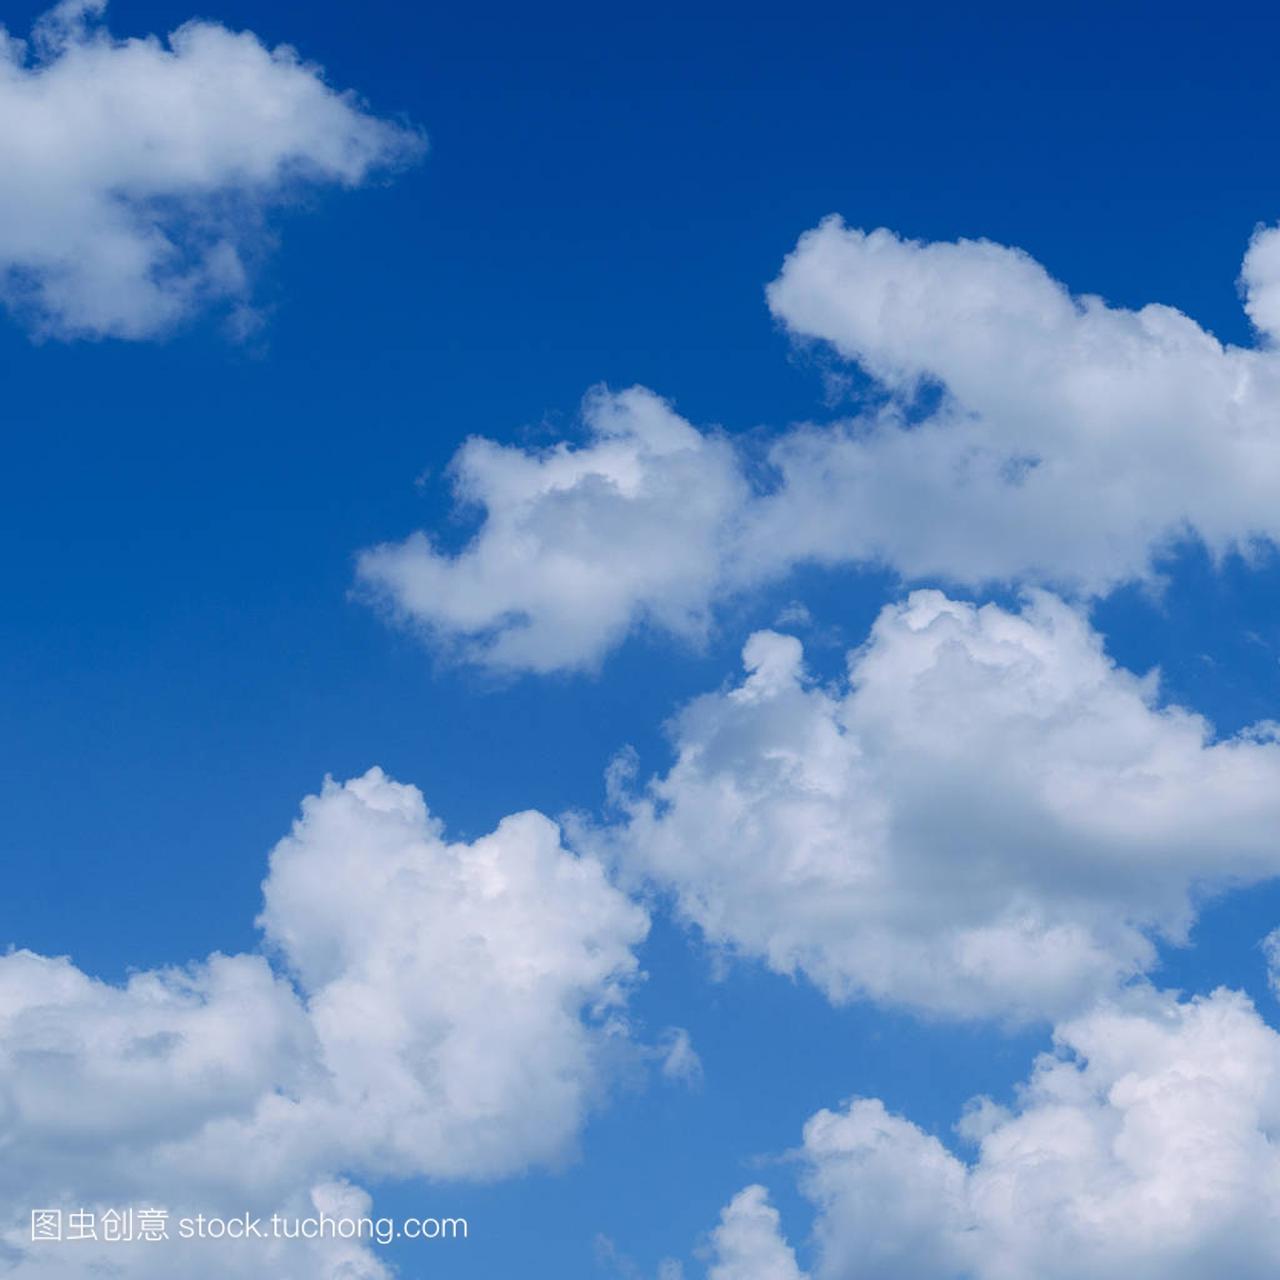 White fluffy clouds in the vast blue sky. Abstract